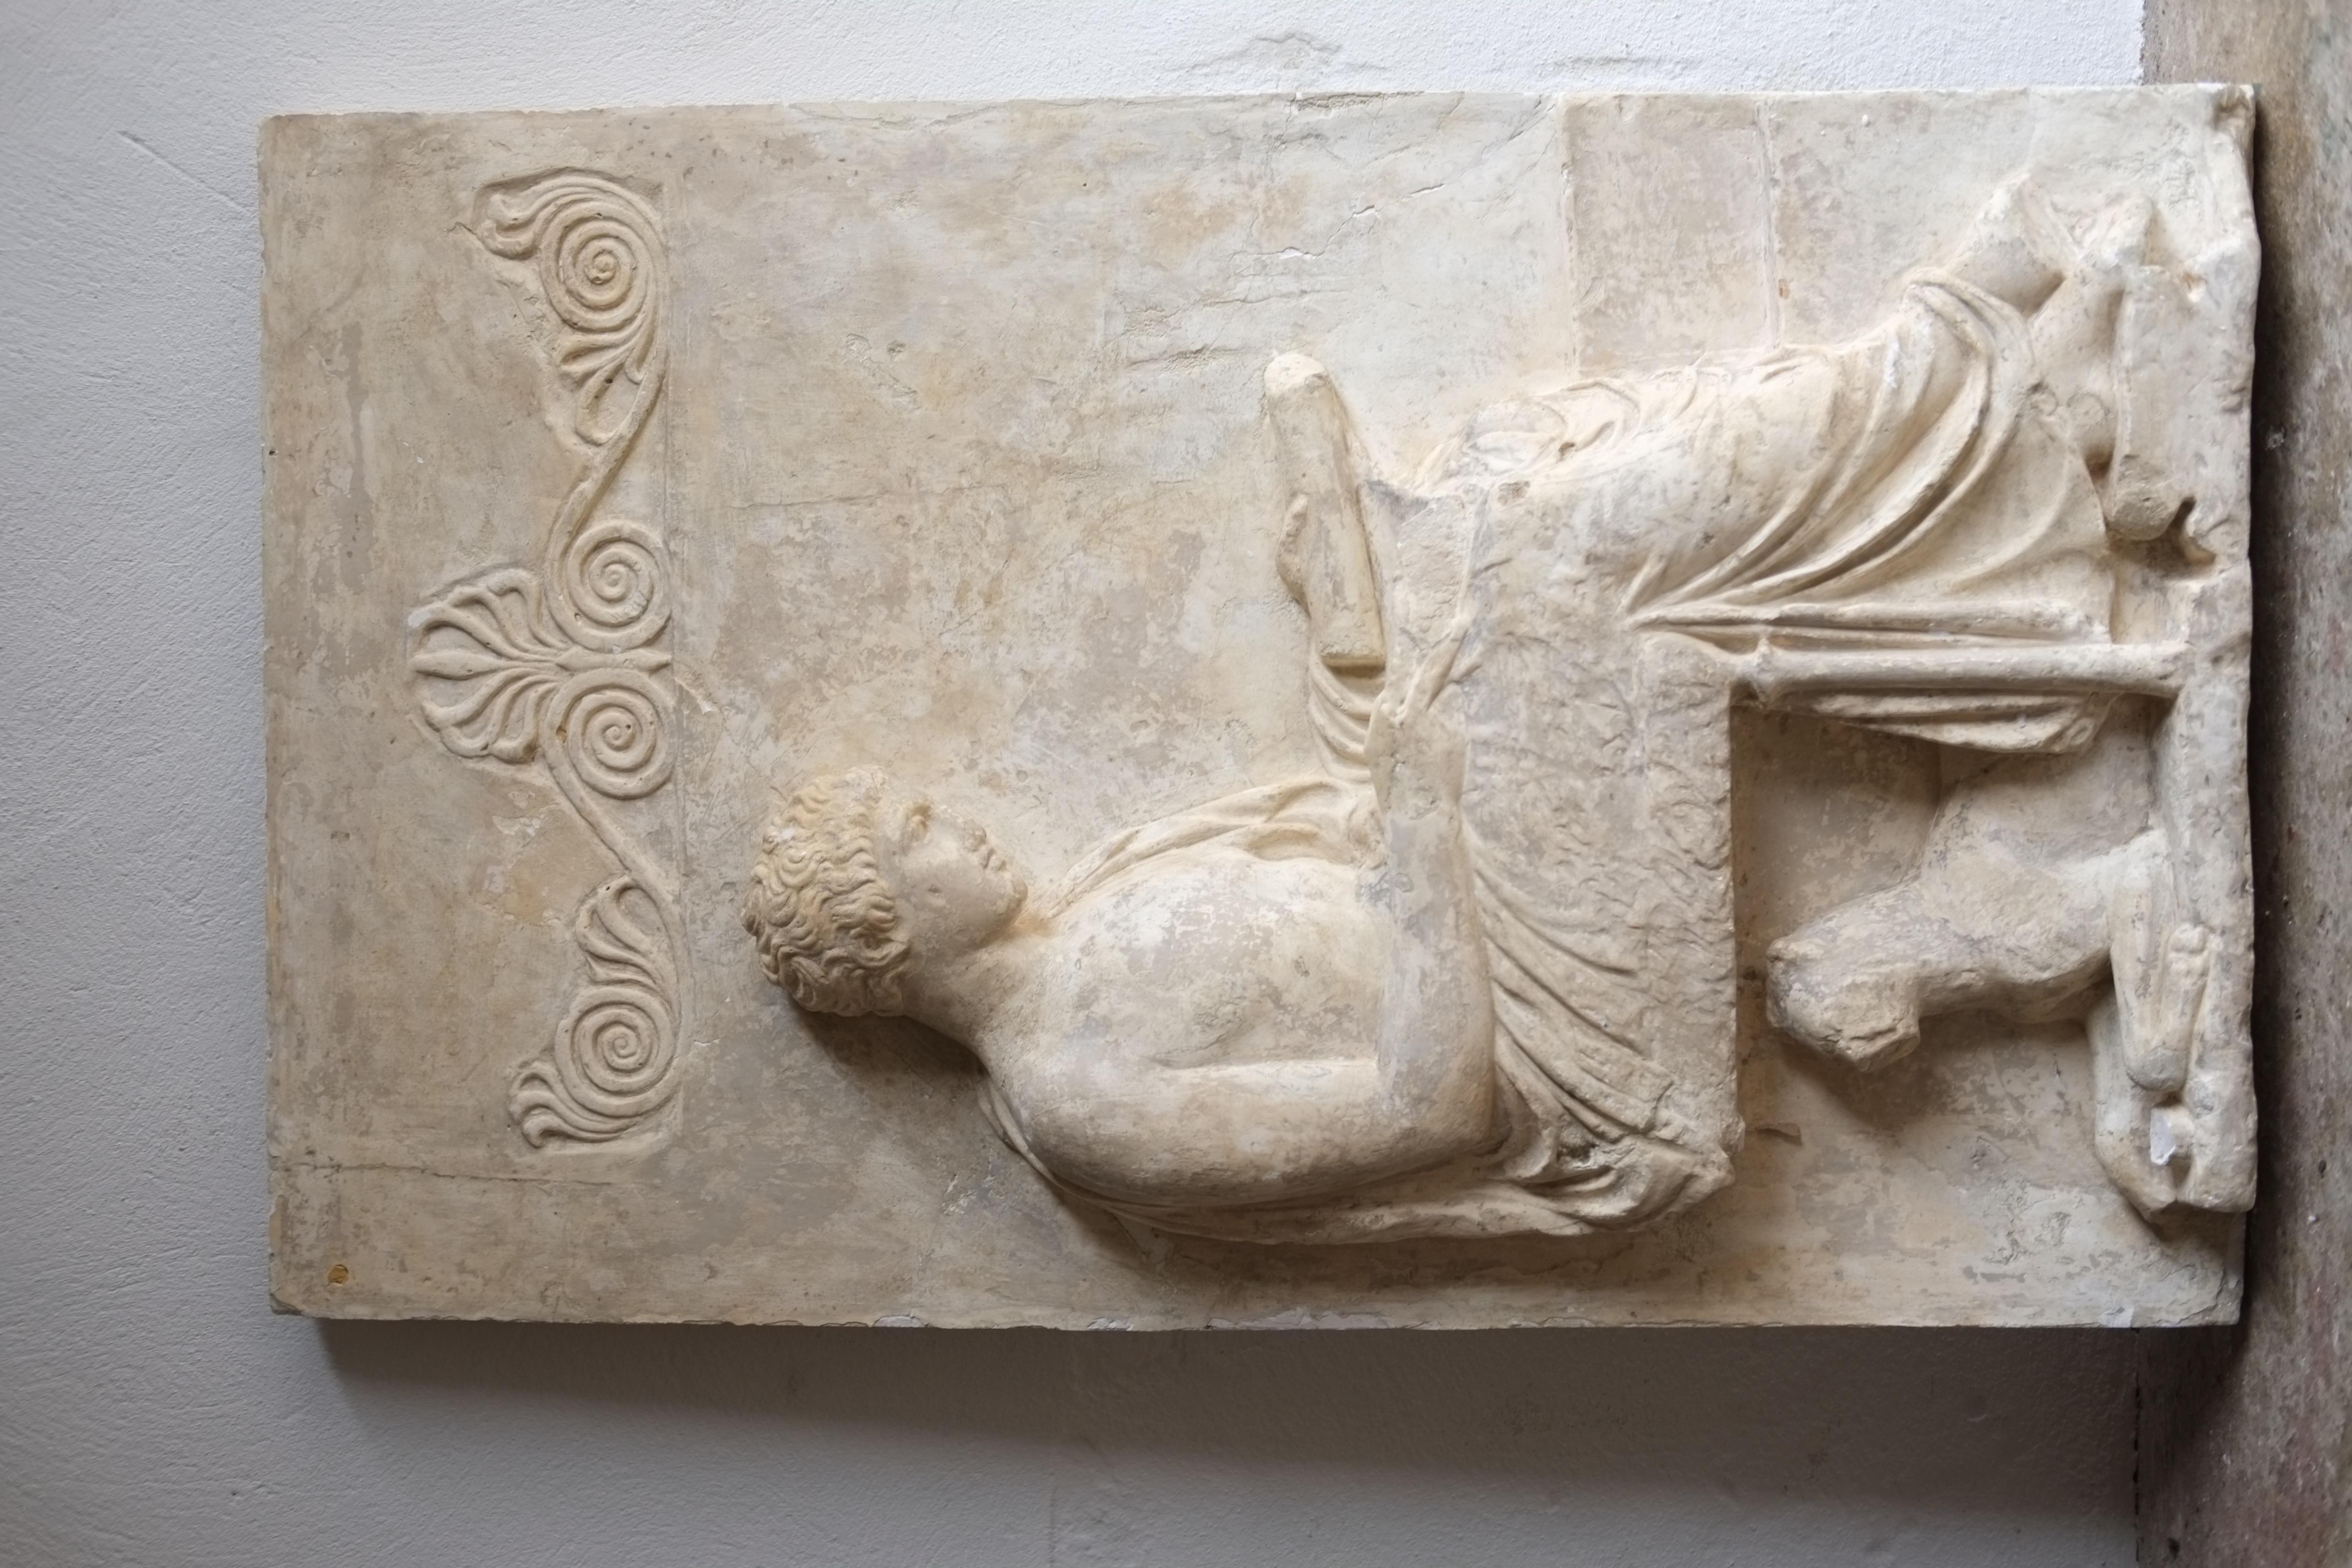 19th Century 19th-Century Plaster Casting From The Grottaferrata Marble Grave Stele